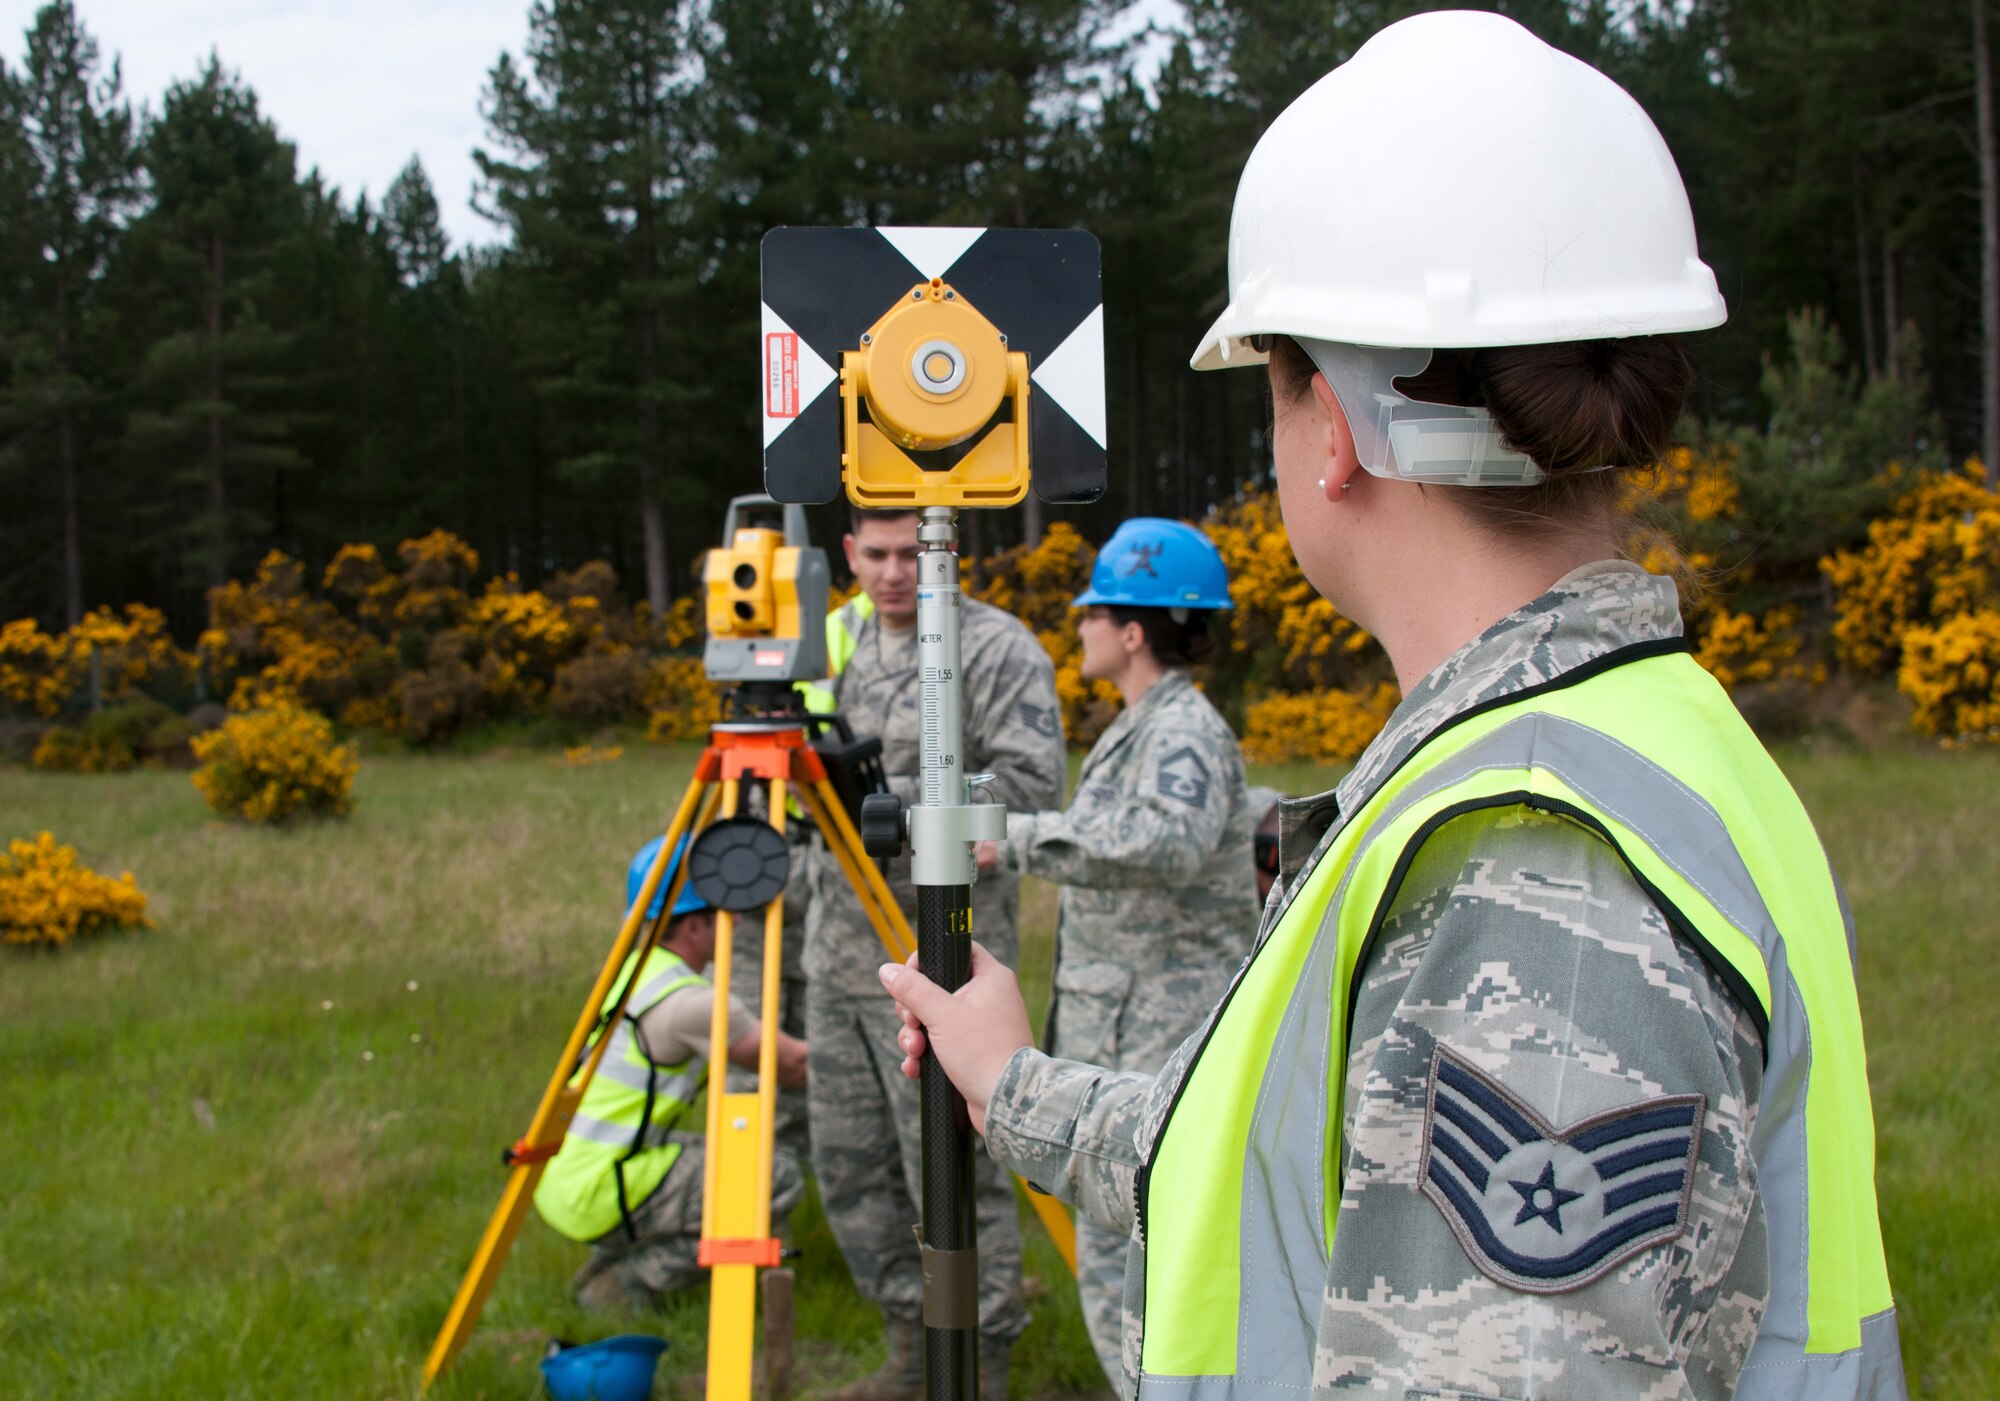 U.S. Air Force Staff Sgt. Melissa Mussa, an HVAC specialist with the Civil Engineering Squadron of the 128th Air Refueling Wing, holds a Trimble SPS730 Robotic Total Station June 10, 2015, at Kinloss Barracks in Morayshire, Scotland, United Kingdom, in support of Exercise Flying Rose. The Trimble SPS730 Robotic Total Station is a surveying instrument used to measure the angles, elevations, and distances involved in a construction site. The Airmen were preparing this site for the construction of a troop shelter, set to be used during Kinloss Barracks’ training missions.  (U.S. Air National Guard photo by Airman 1st Class Morgan R. Lipinski/Released)